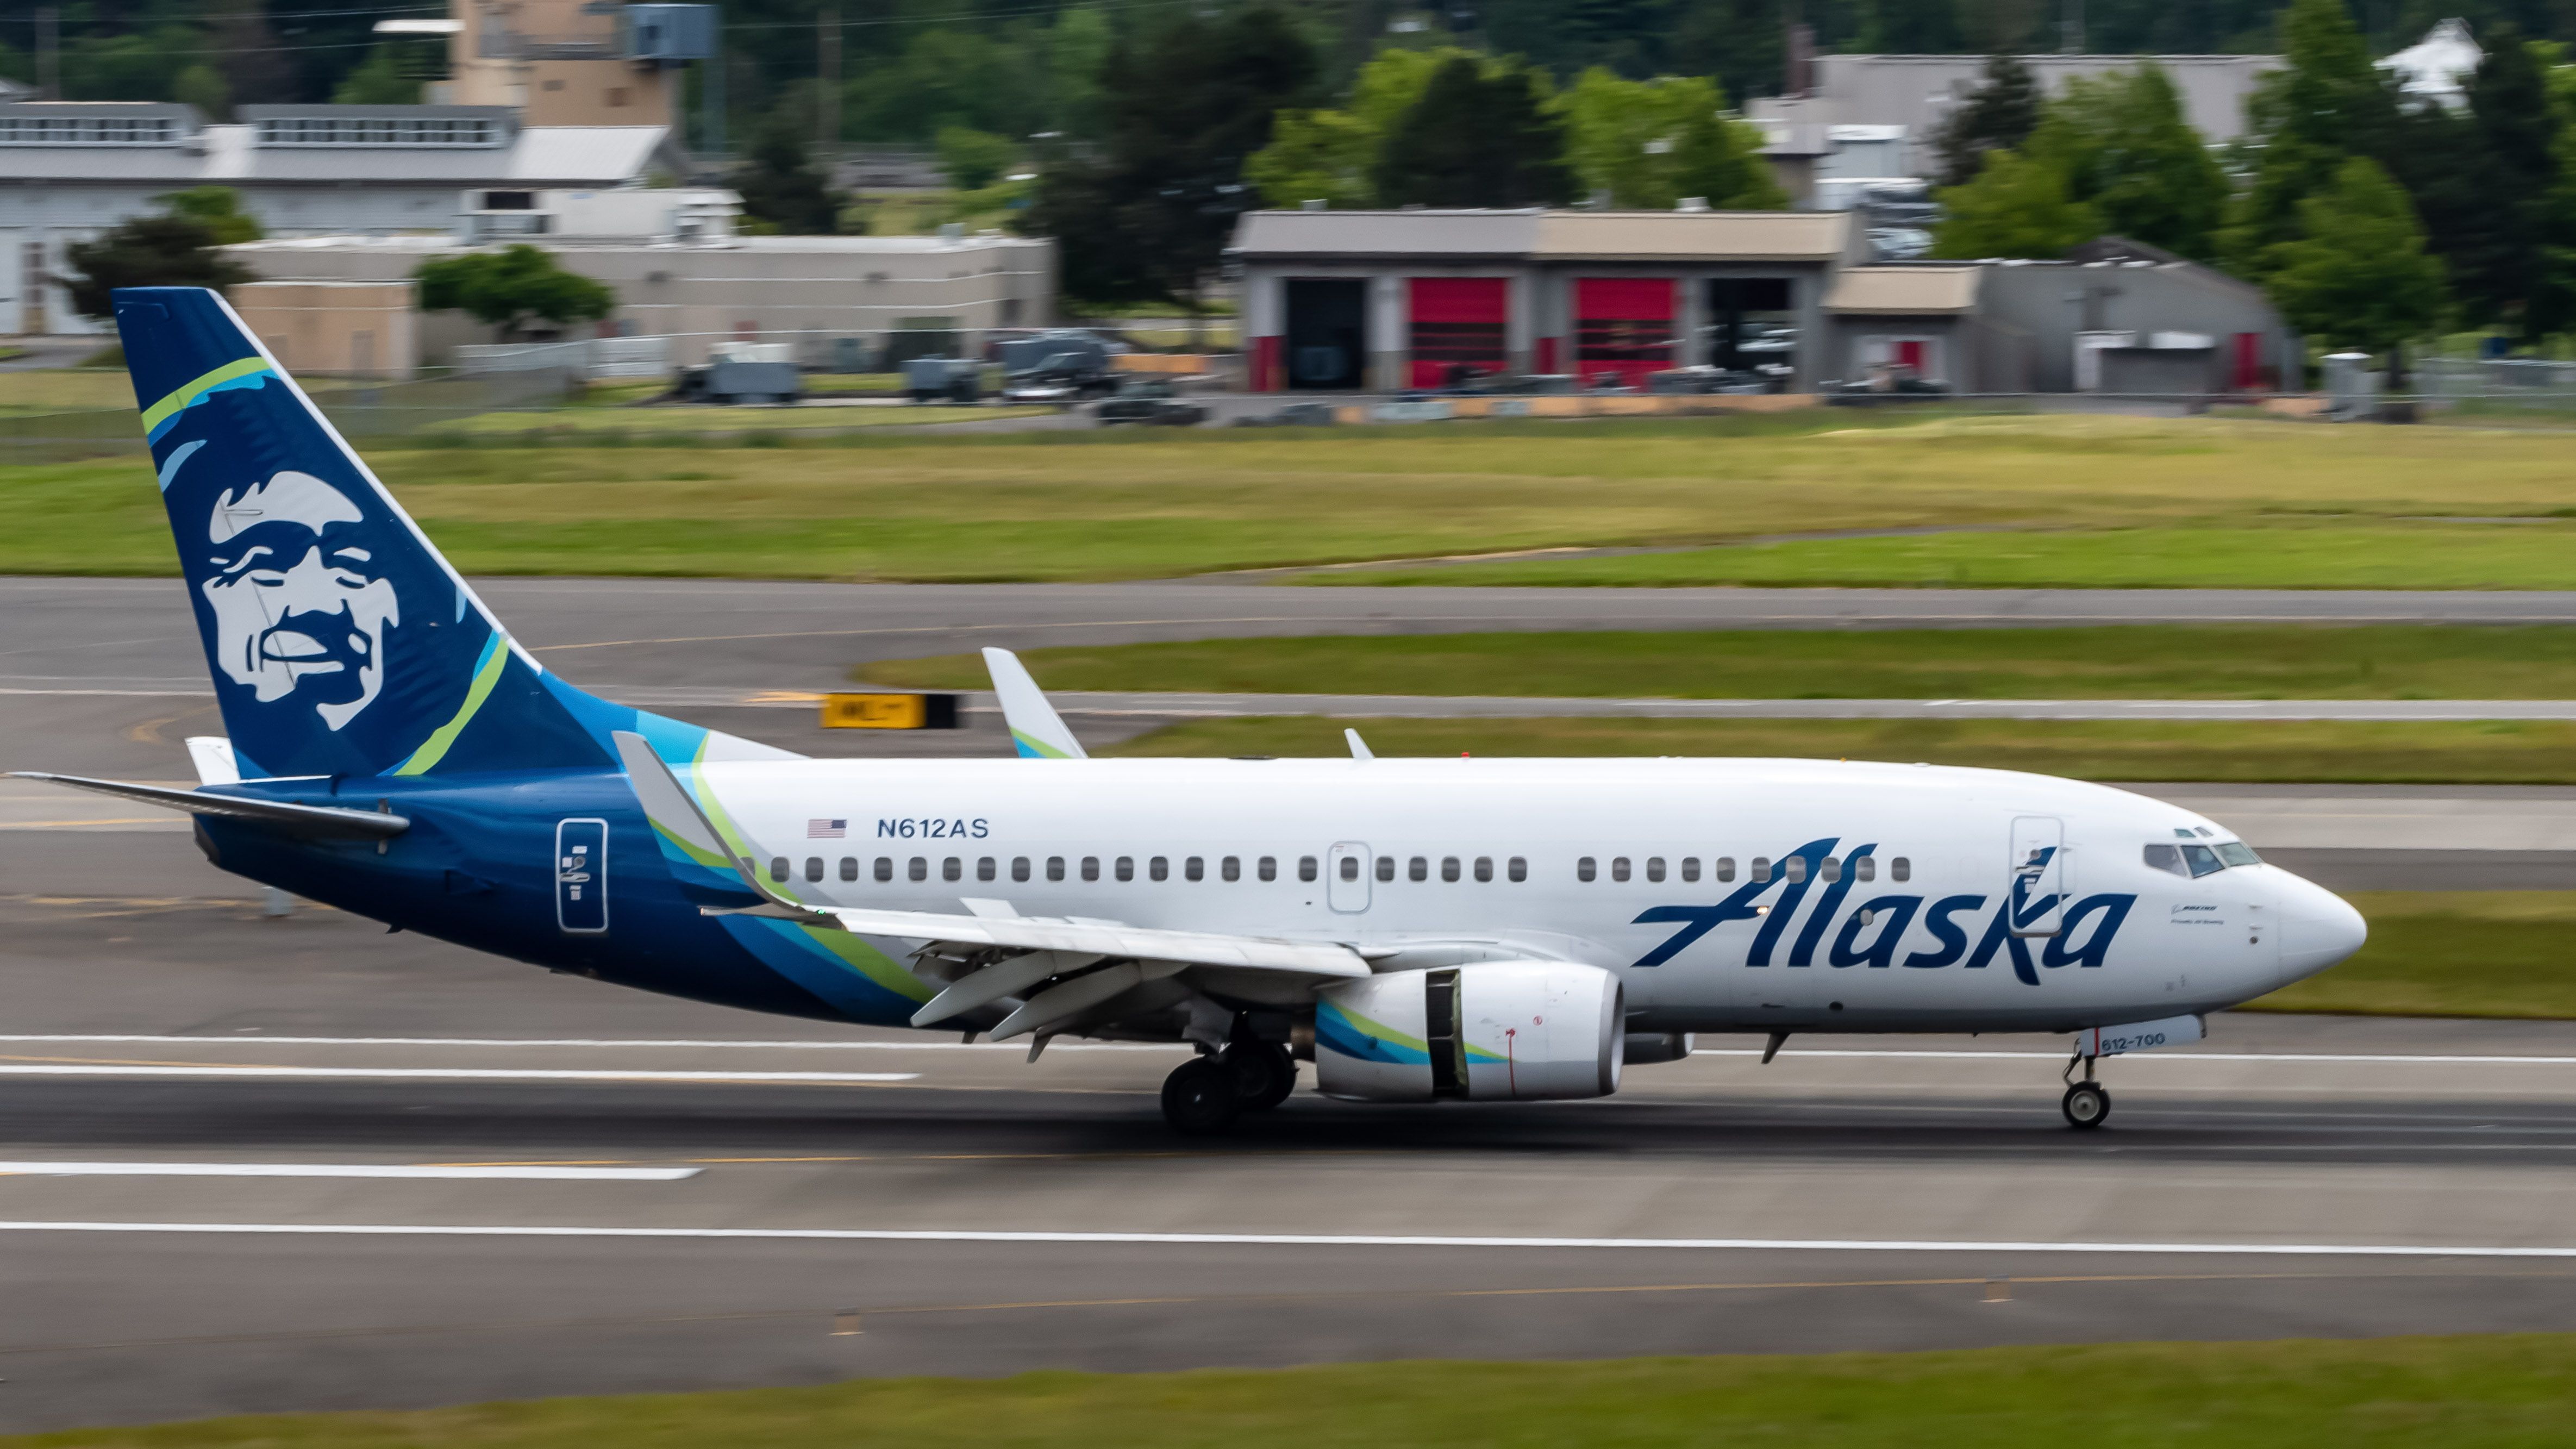 In Photos The Evolution Of Alaska Airlines' Livery